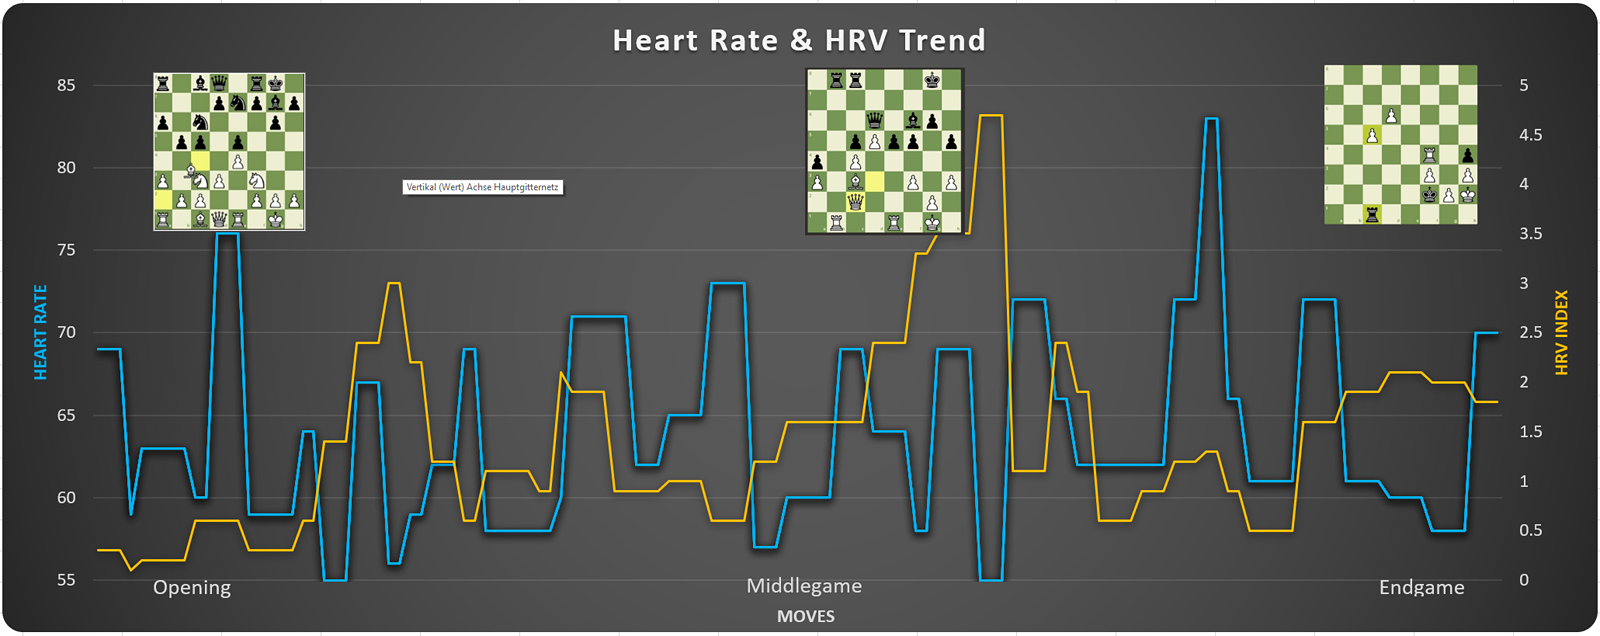 Heart rate and HRV trend